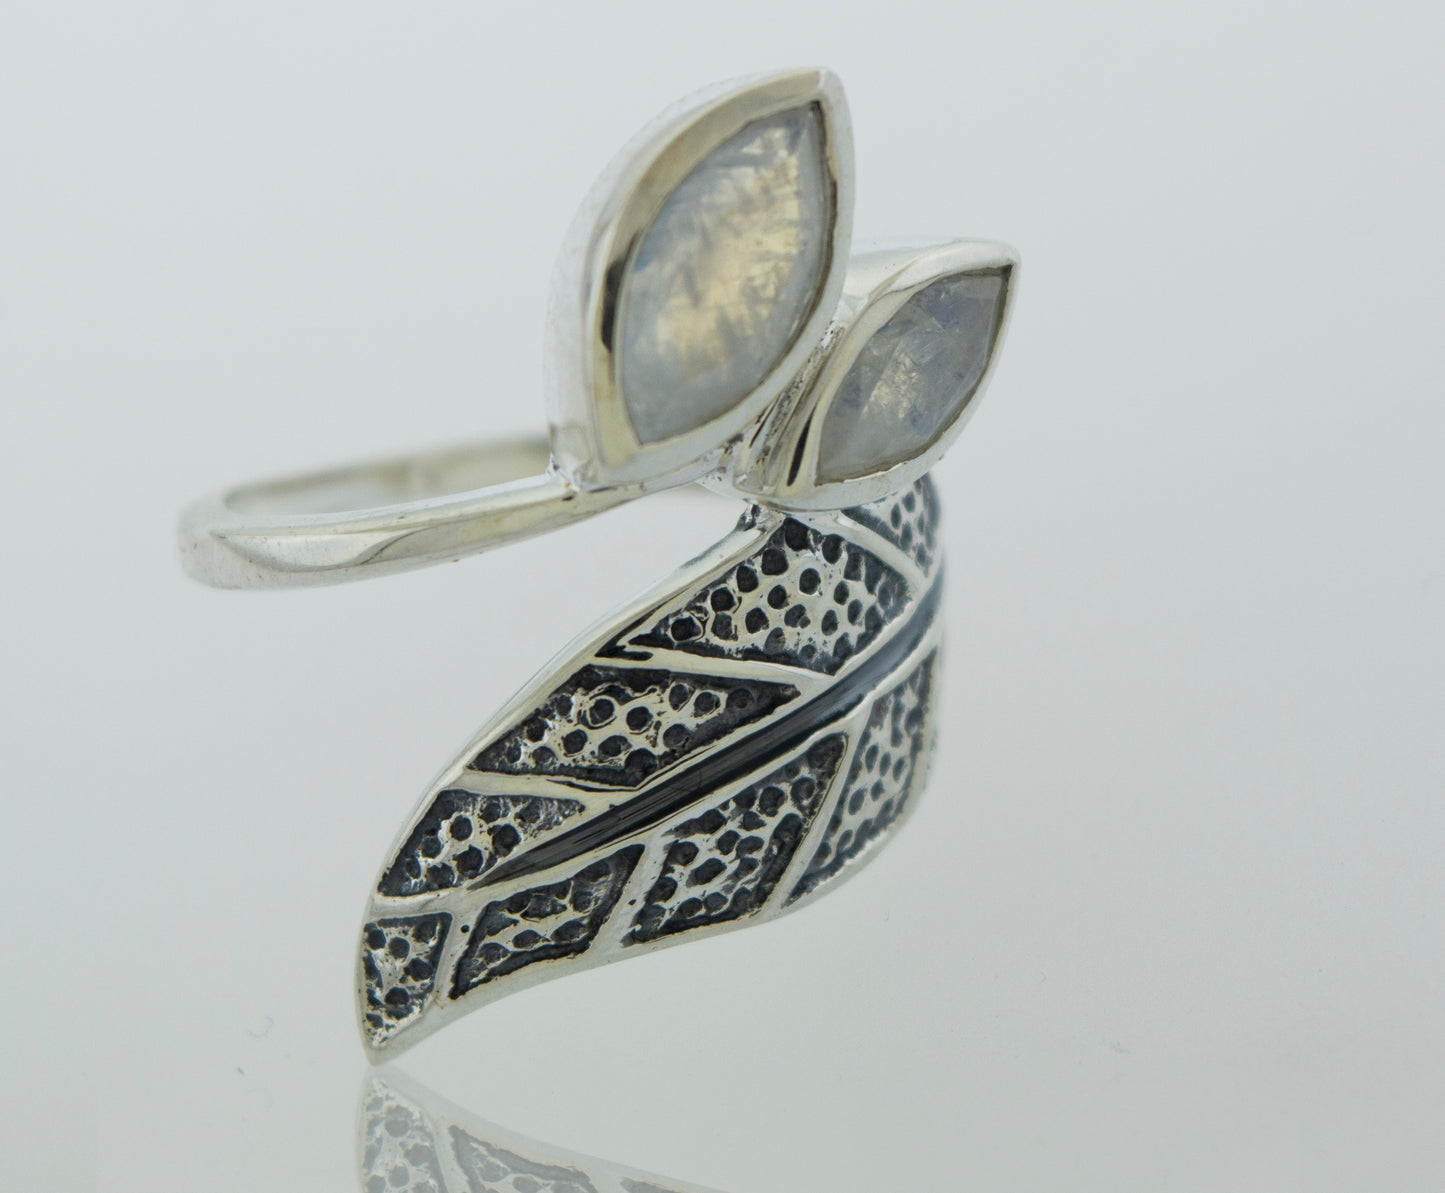 A Super Silver Leaf Ring with Moonstones.